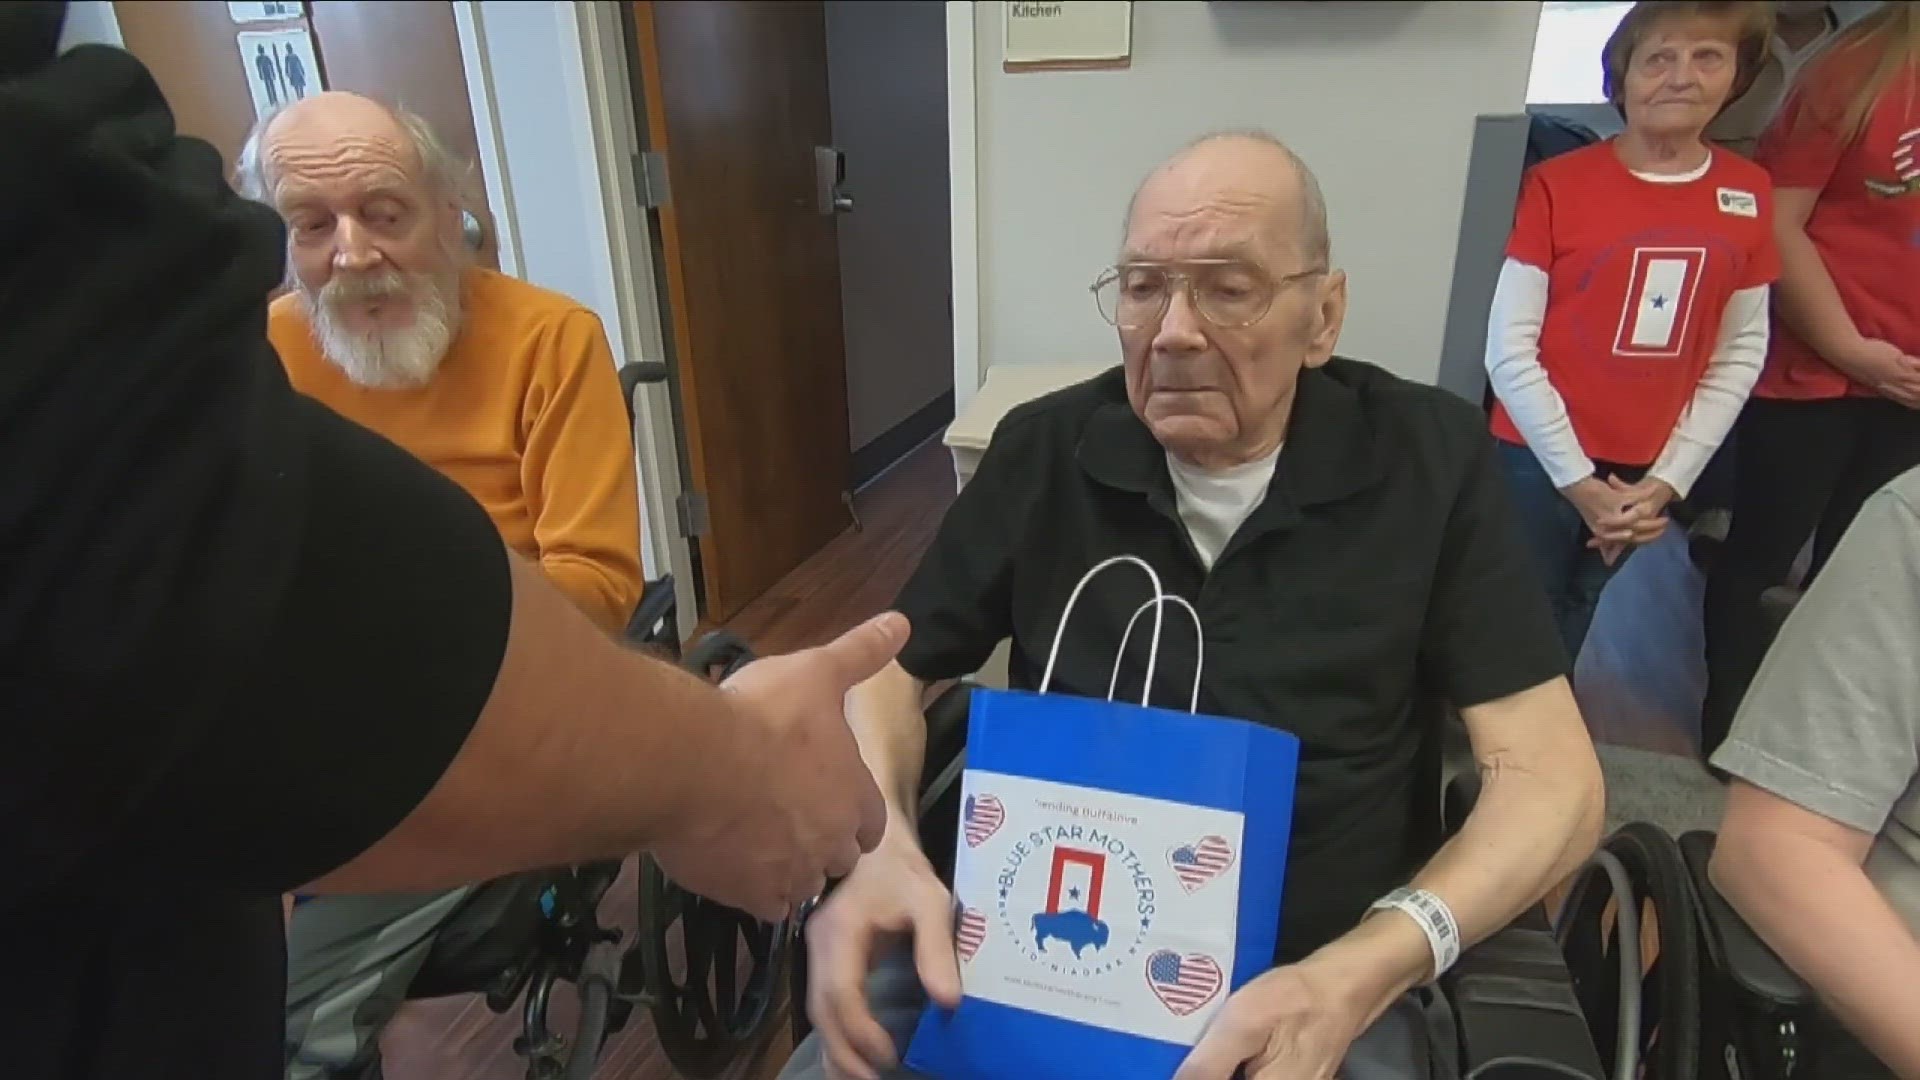 Every year the local chapter of Blue Star Mothers sets out to make sure hospitalized Veterans feel the love. They stopped by VA hospitals across WNY with gifts.